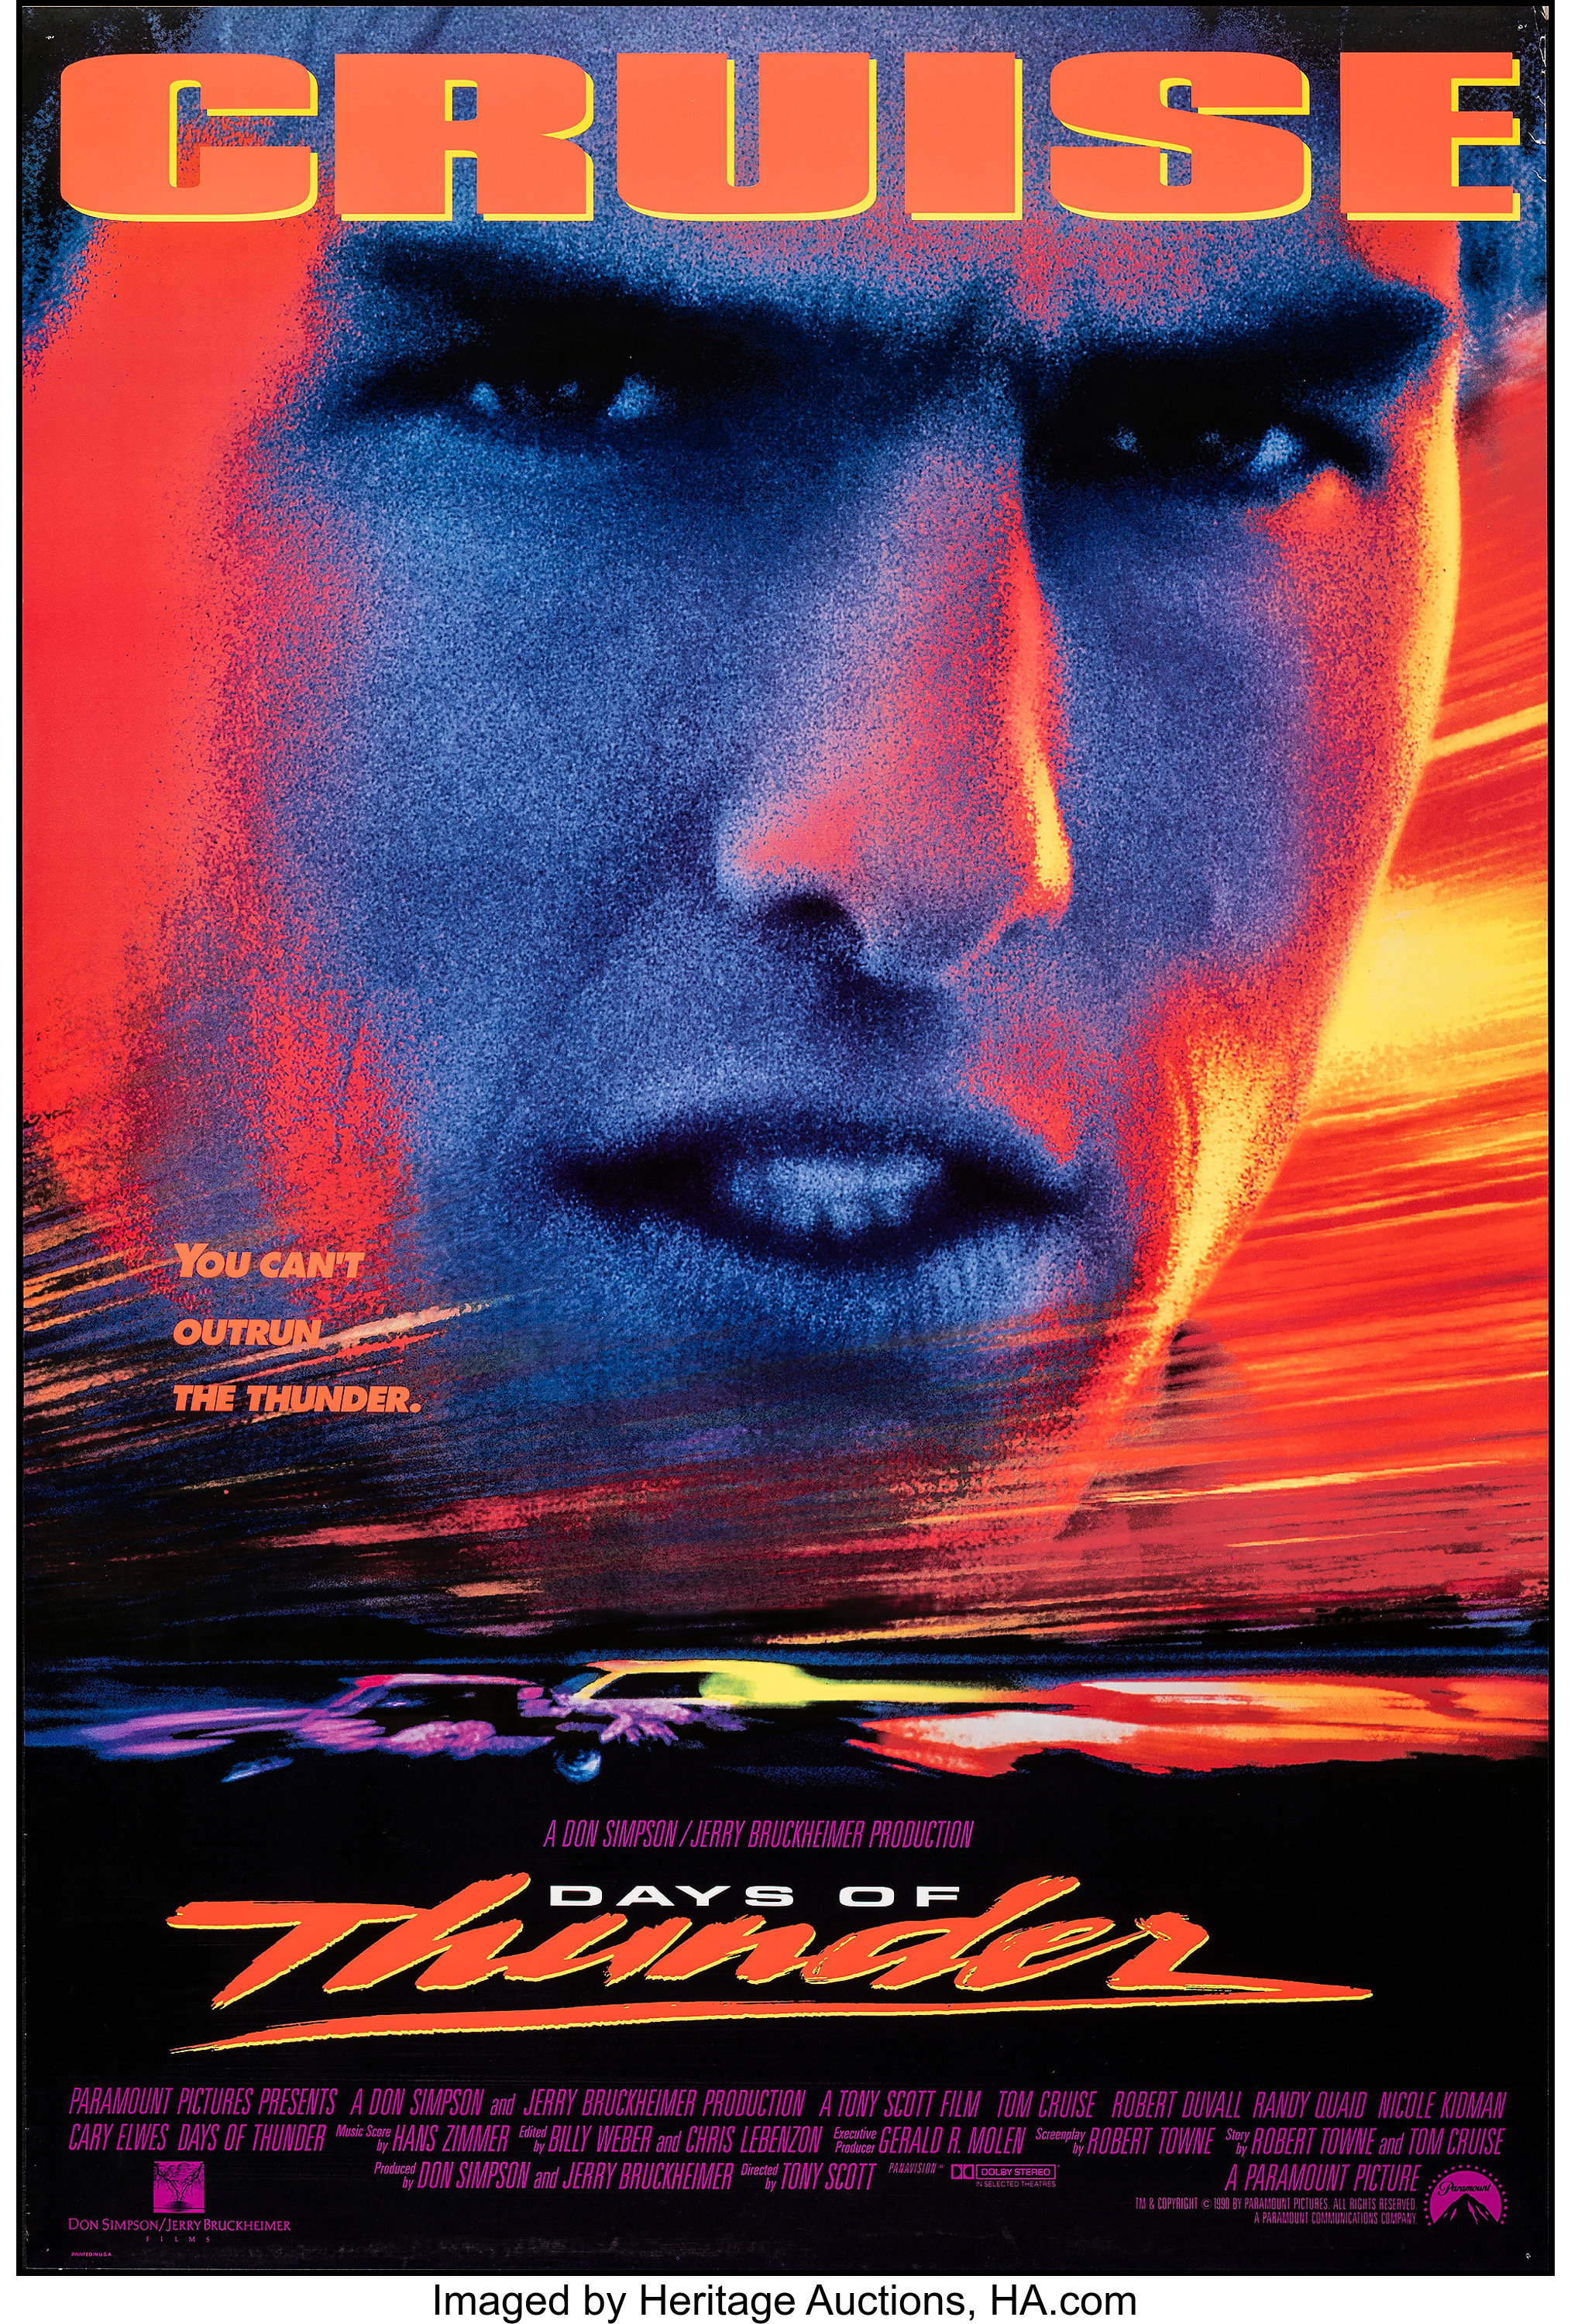 Search: Days of Thunder [54 790 231]